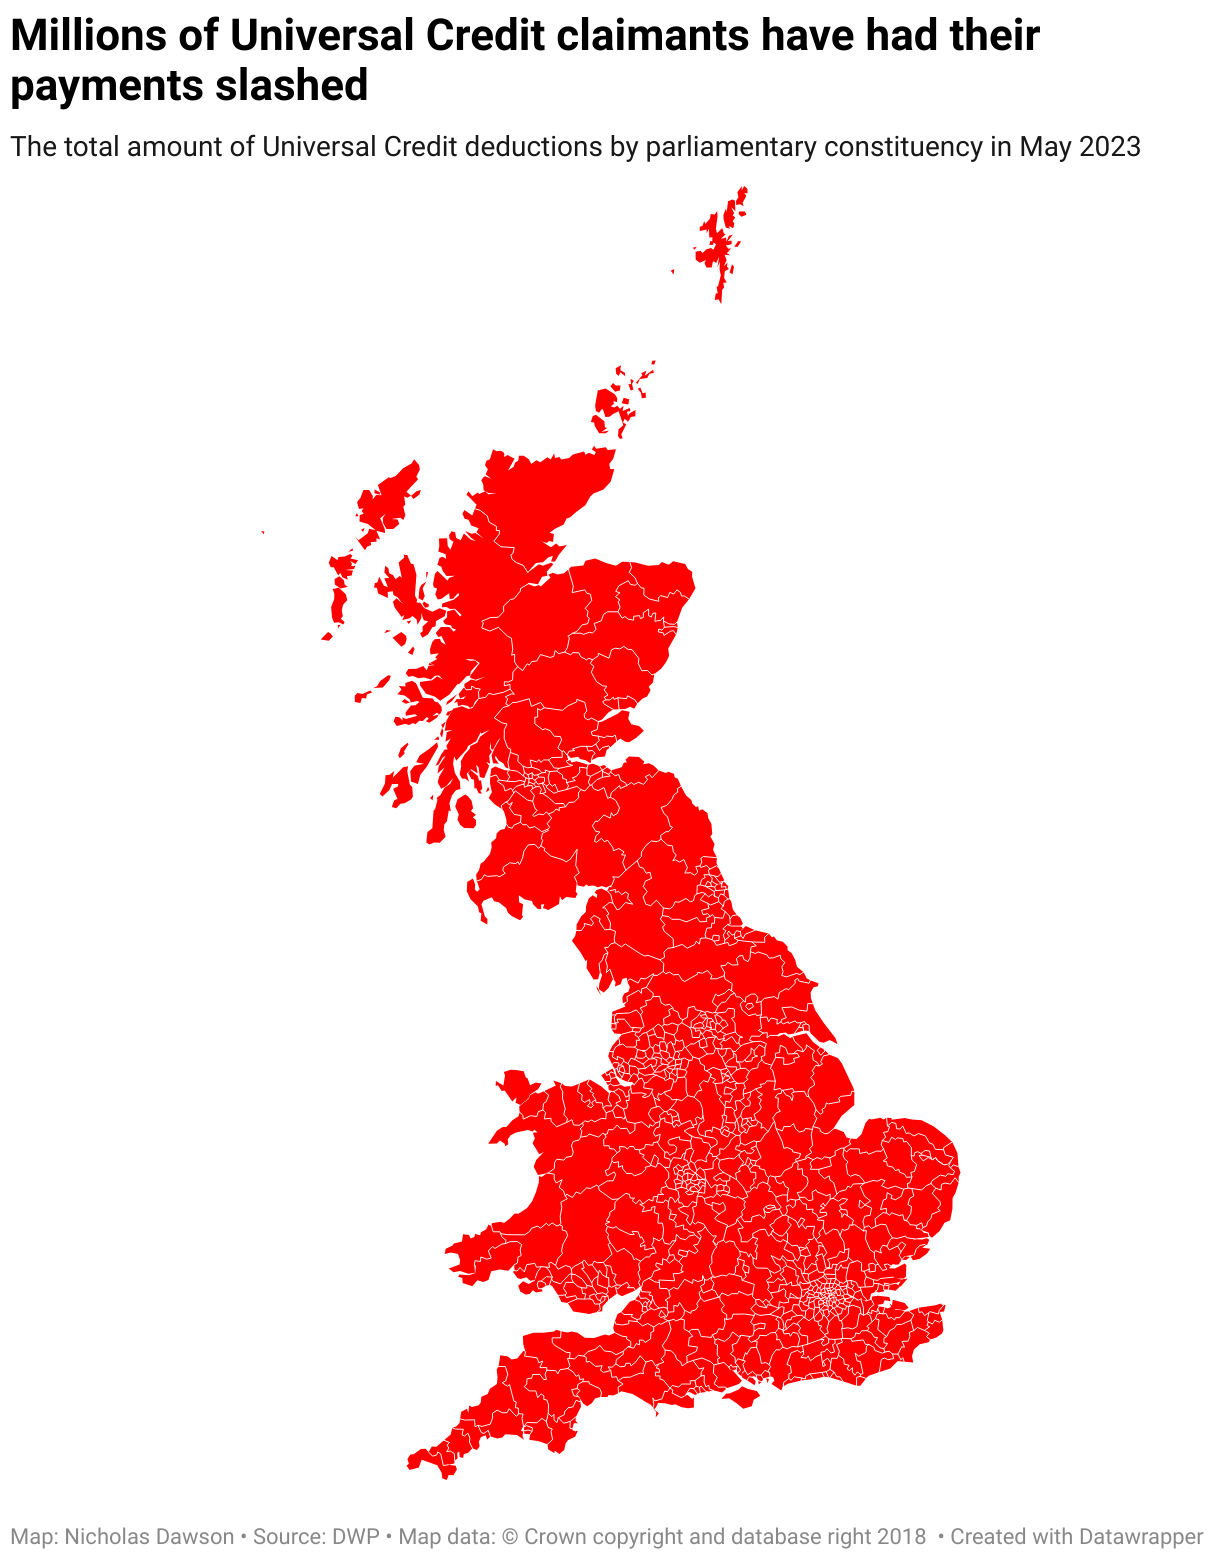 A map showing the total amount of Universal Credit deductions by parliamentary constituency